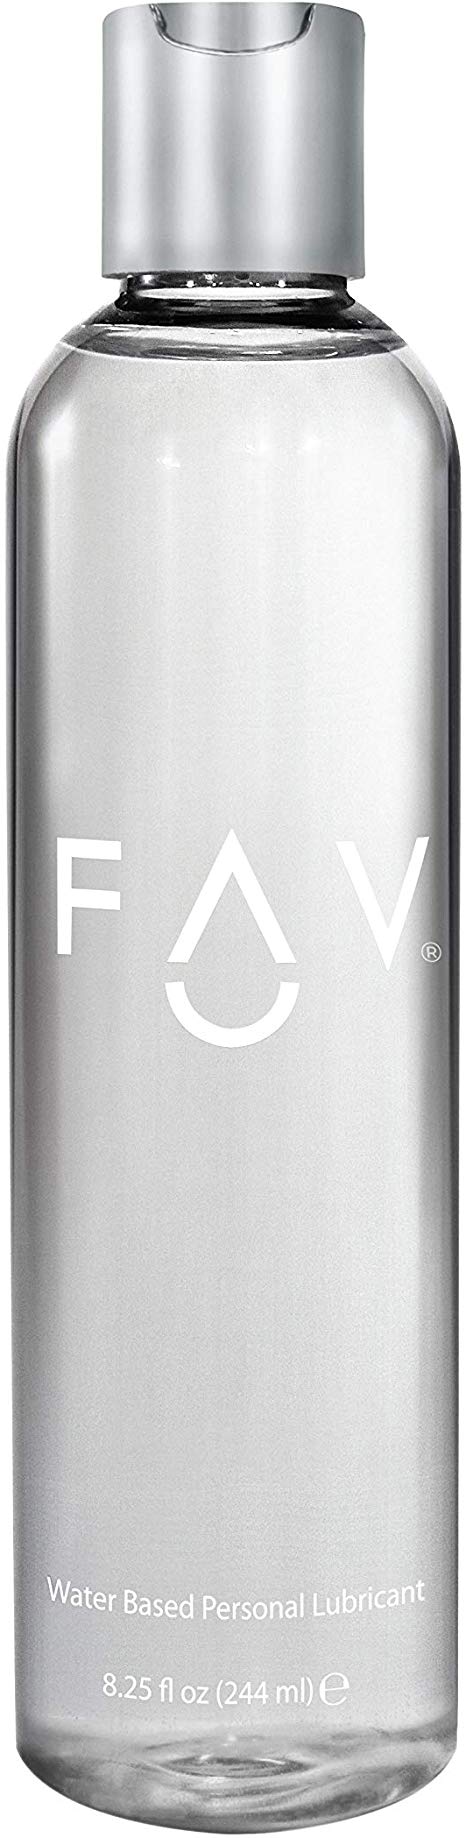 FAV Water Based Luxury Personal Lubricant, 8.25 Ounces